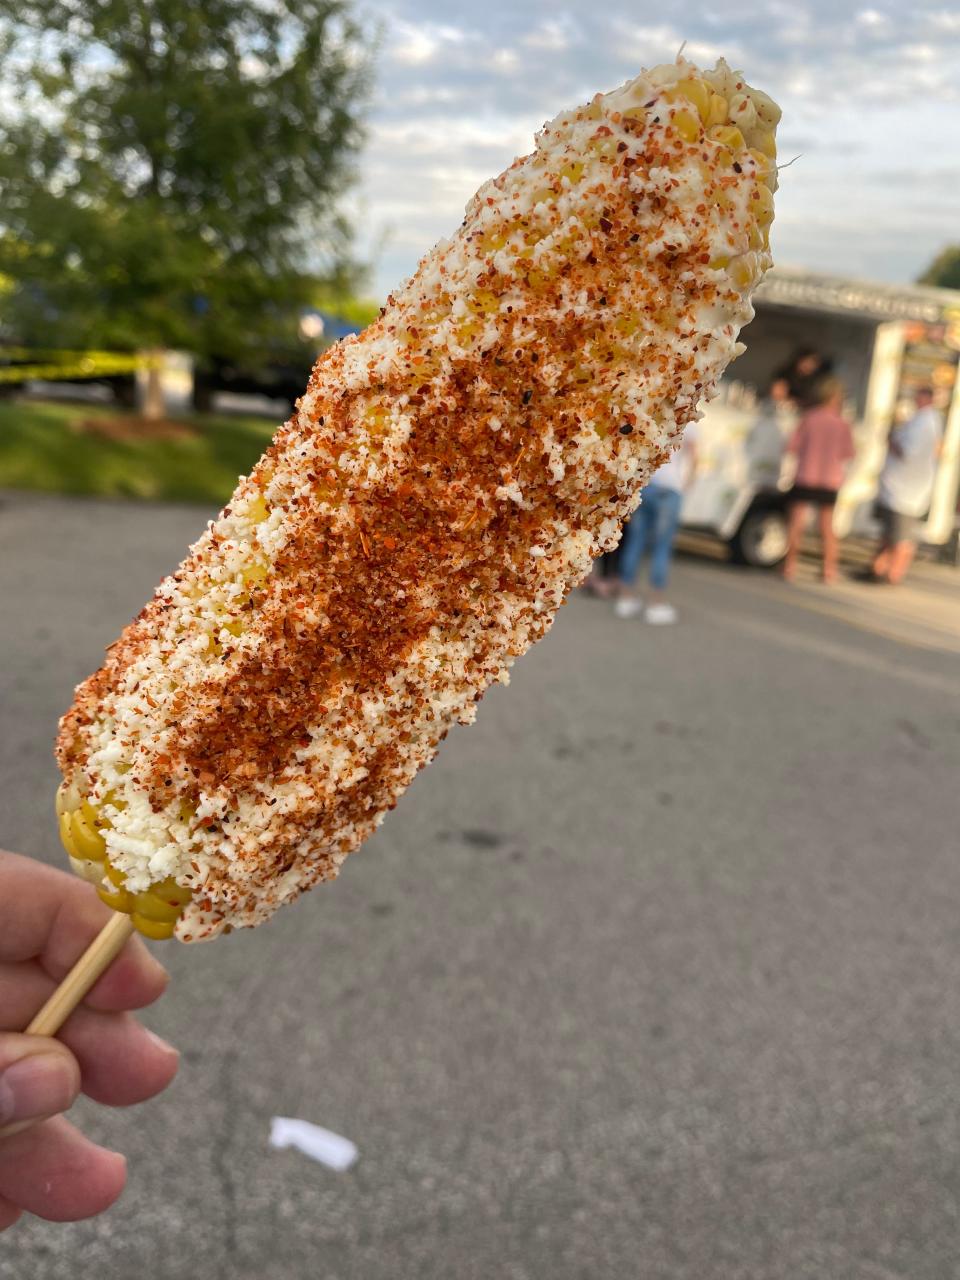 Mexican corn on the cob from Gourmet Corn.